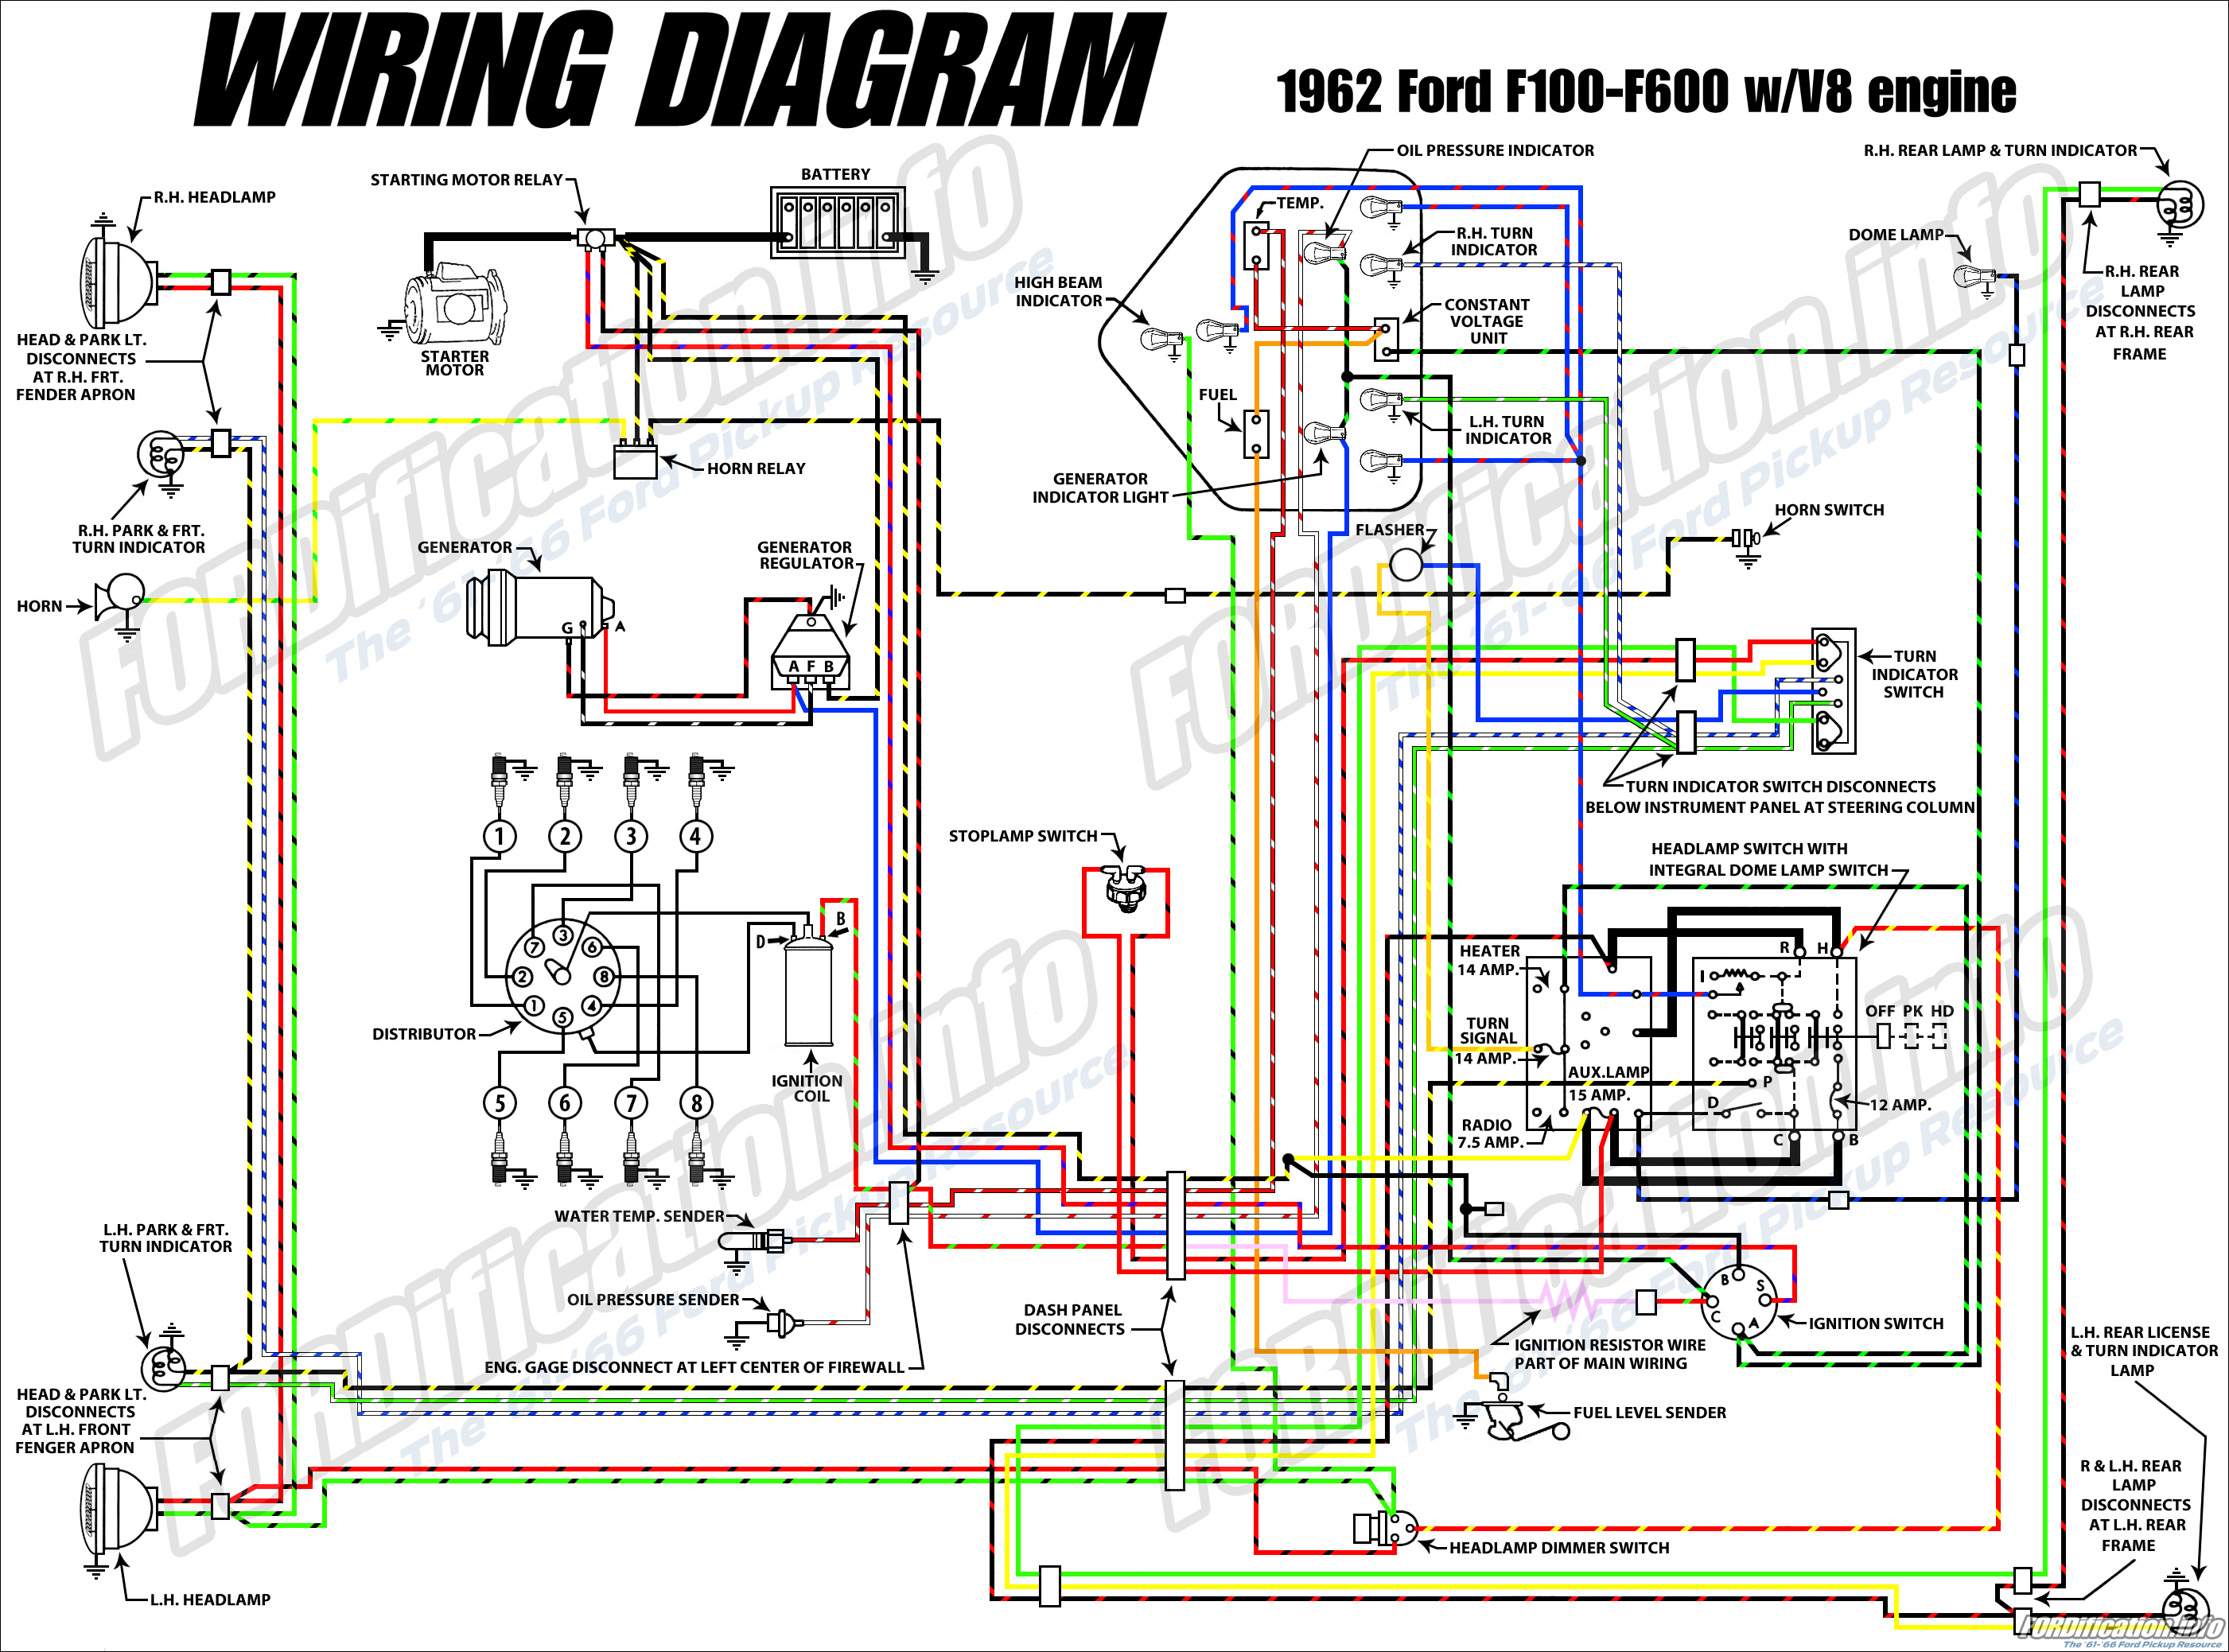 1962 Ford Truck Wiring Diagrams - FORDification.info - The ... wiring schematic for 1963 ford f 100 